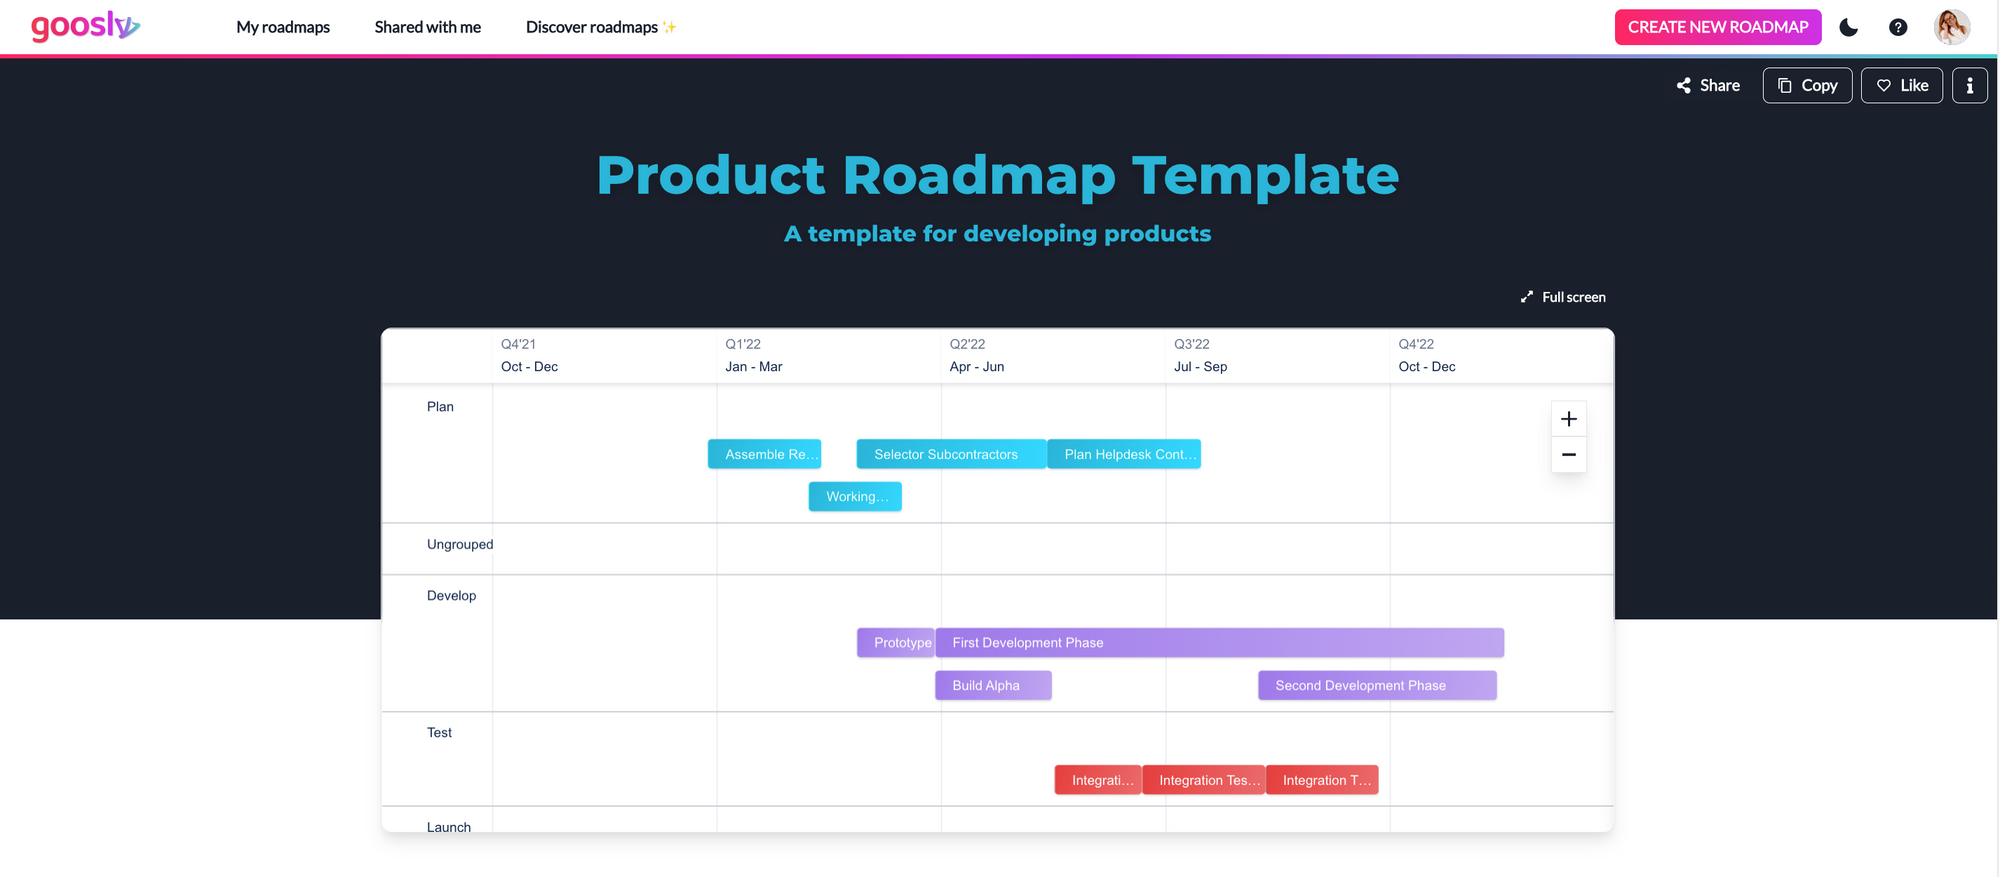 Free product roadmap templates on Goos.ly